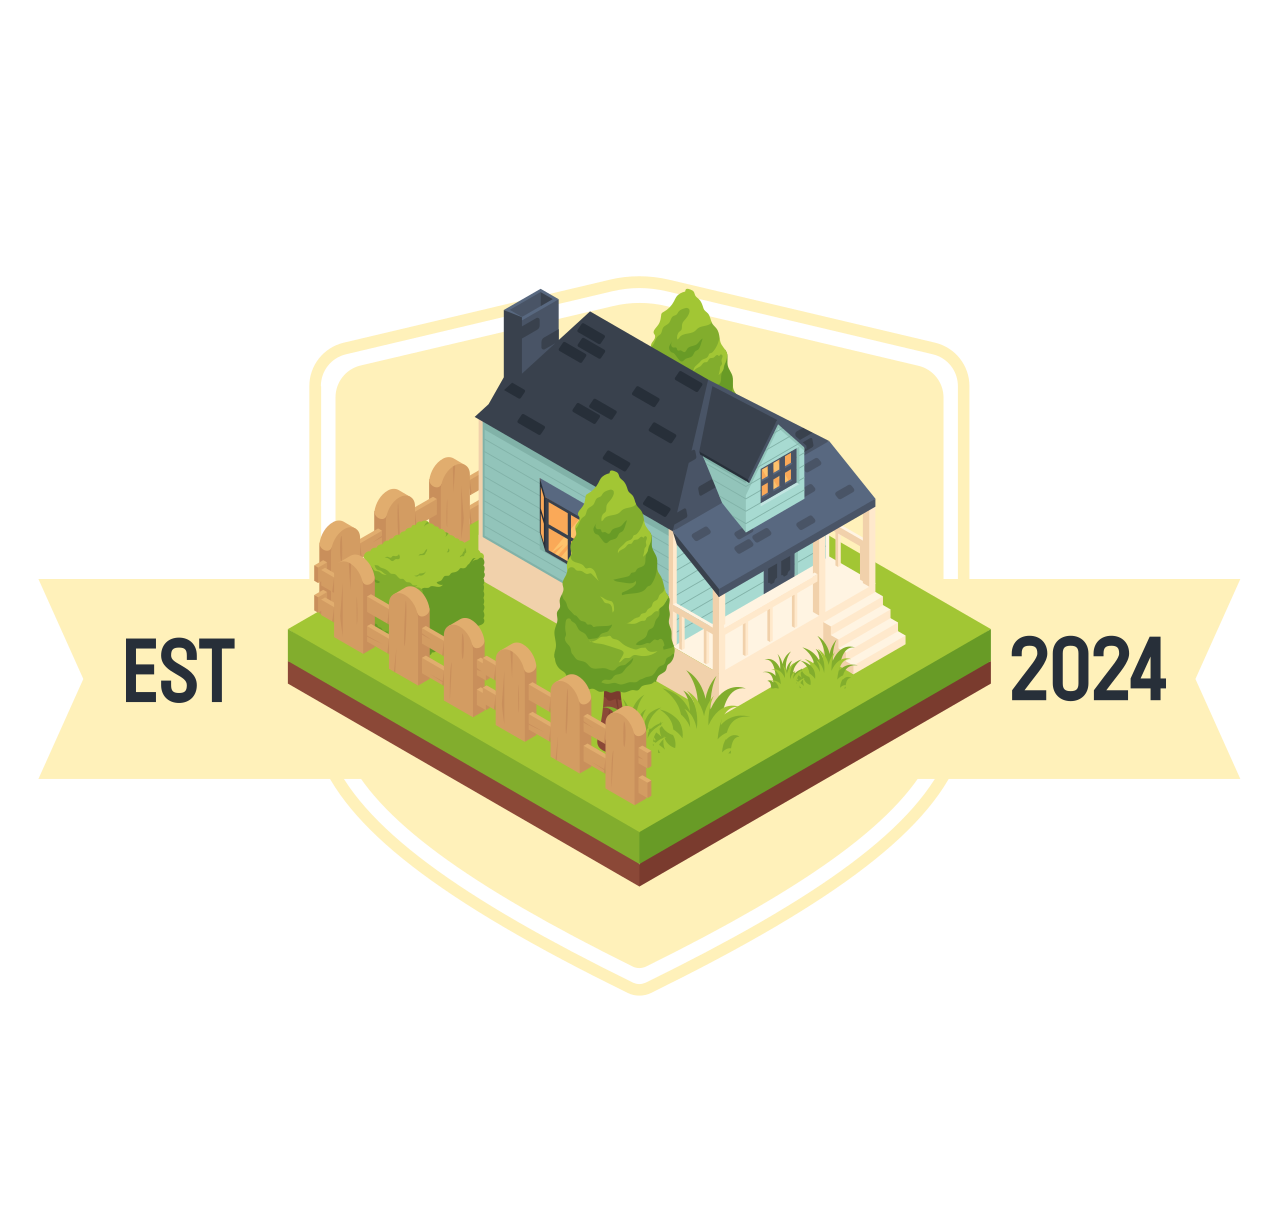 Residential Solutions Unlimited LLC's logo